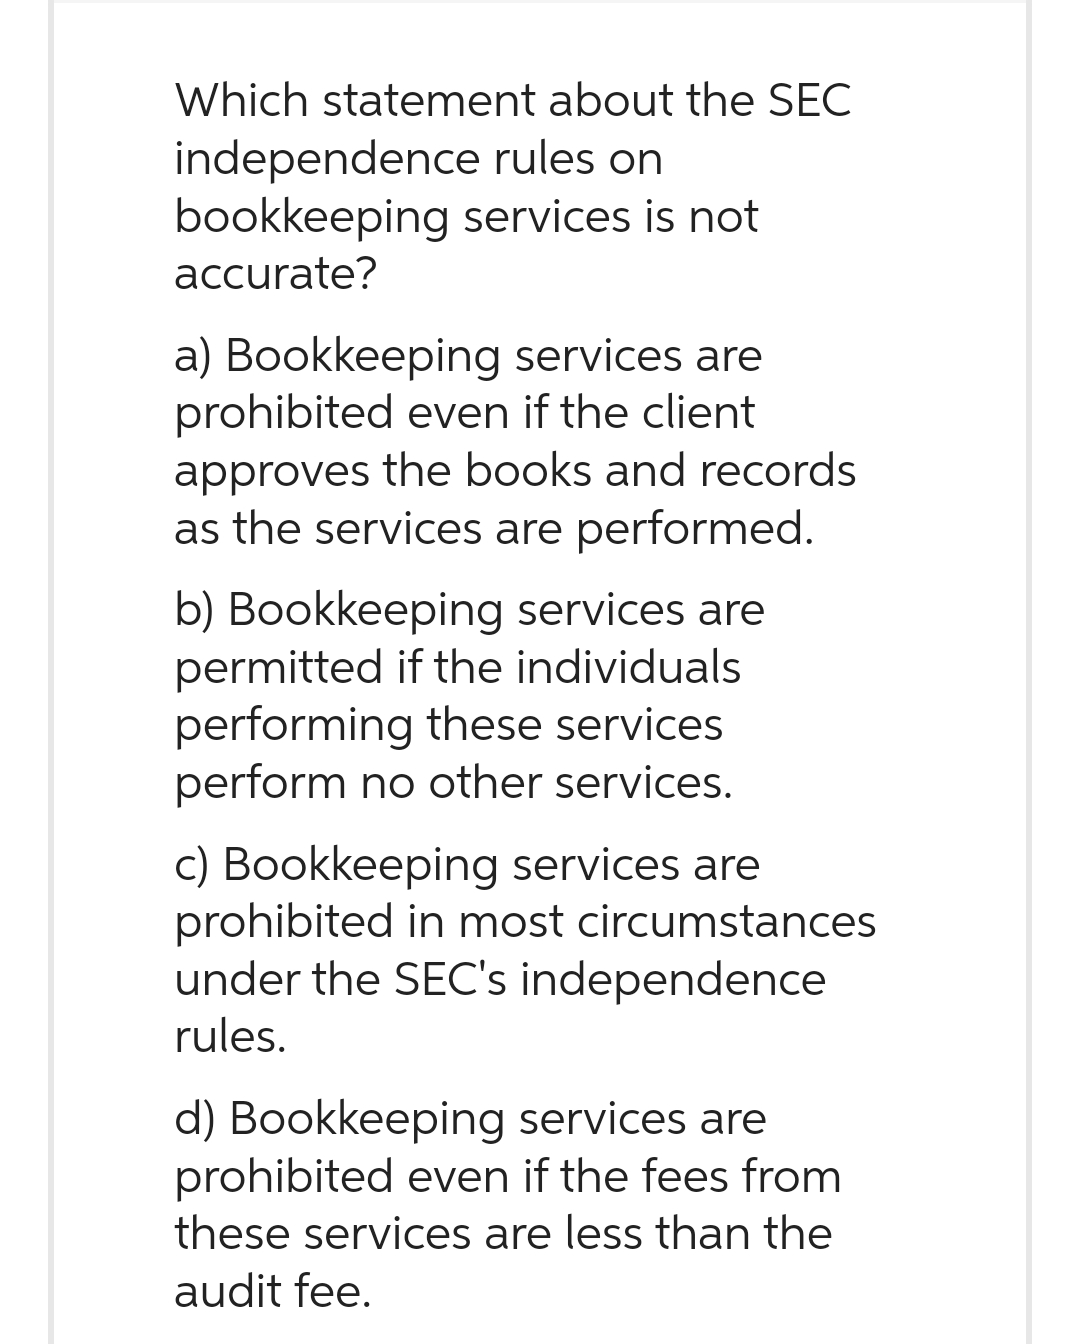 Which statement about the SEC
independence rules on
bookkeeping services is not
accurate?
a) Bookkeeping services are
prohibited even if the client
approves the books and records
as the services are performed.
b) Bookkeeping services are
permitted if the individuals
performing these services
perform no other services.
c) Bookkeeping services are
prohibited in most circumstances
under the SEC's independence
rules.
d) Bookkeeping services are
prohibited even if the fees from
these services are less than the
audit fee.